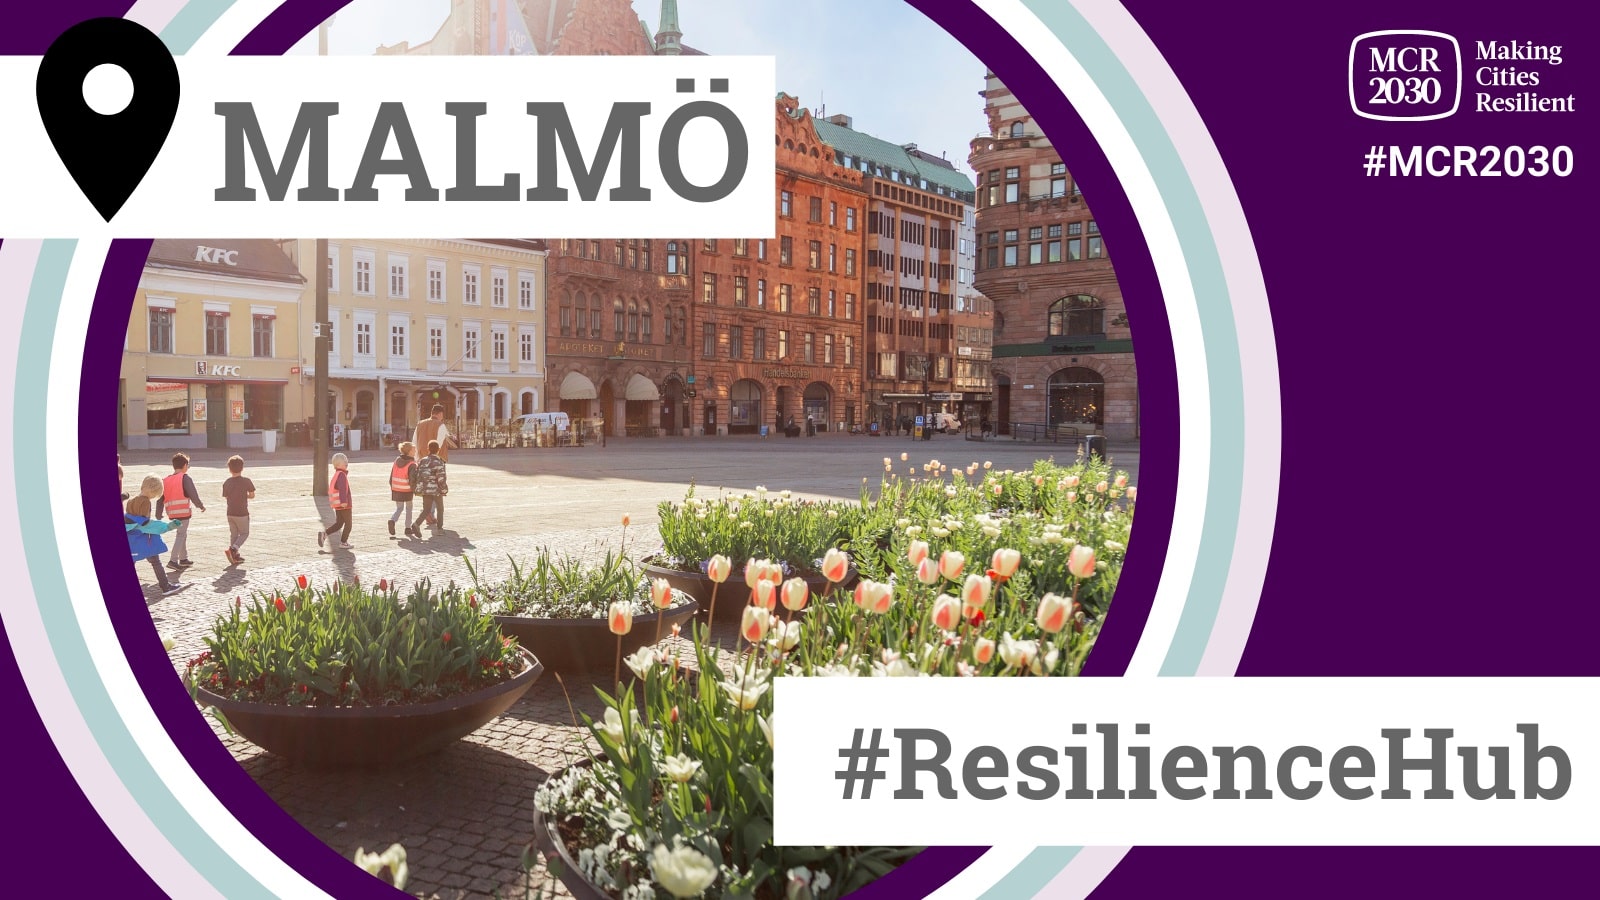 Malmö named as Sweden's second Resilience Hub by UN initiative Making Cities Resilient 2030.